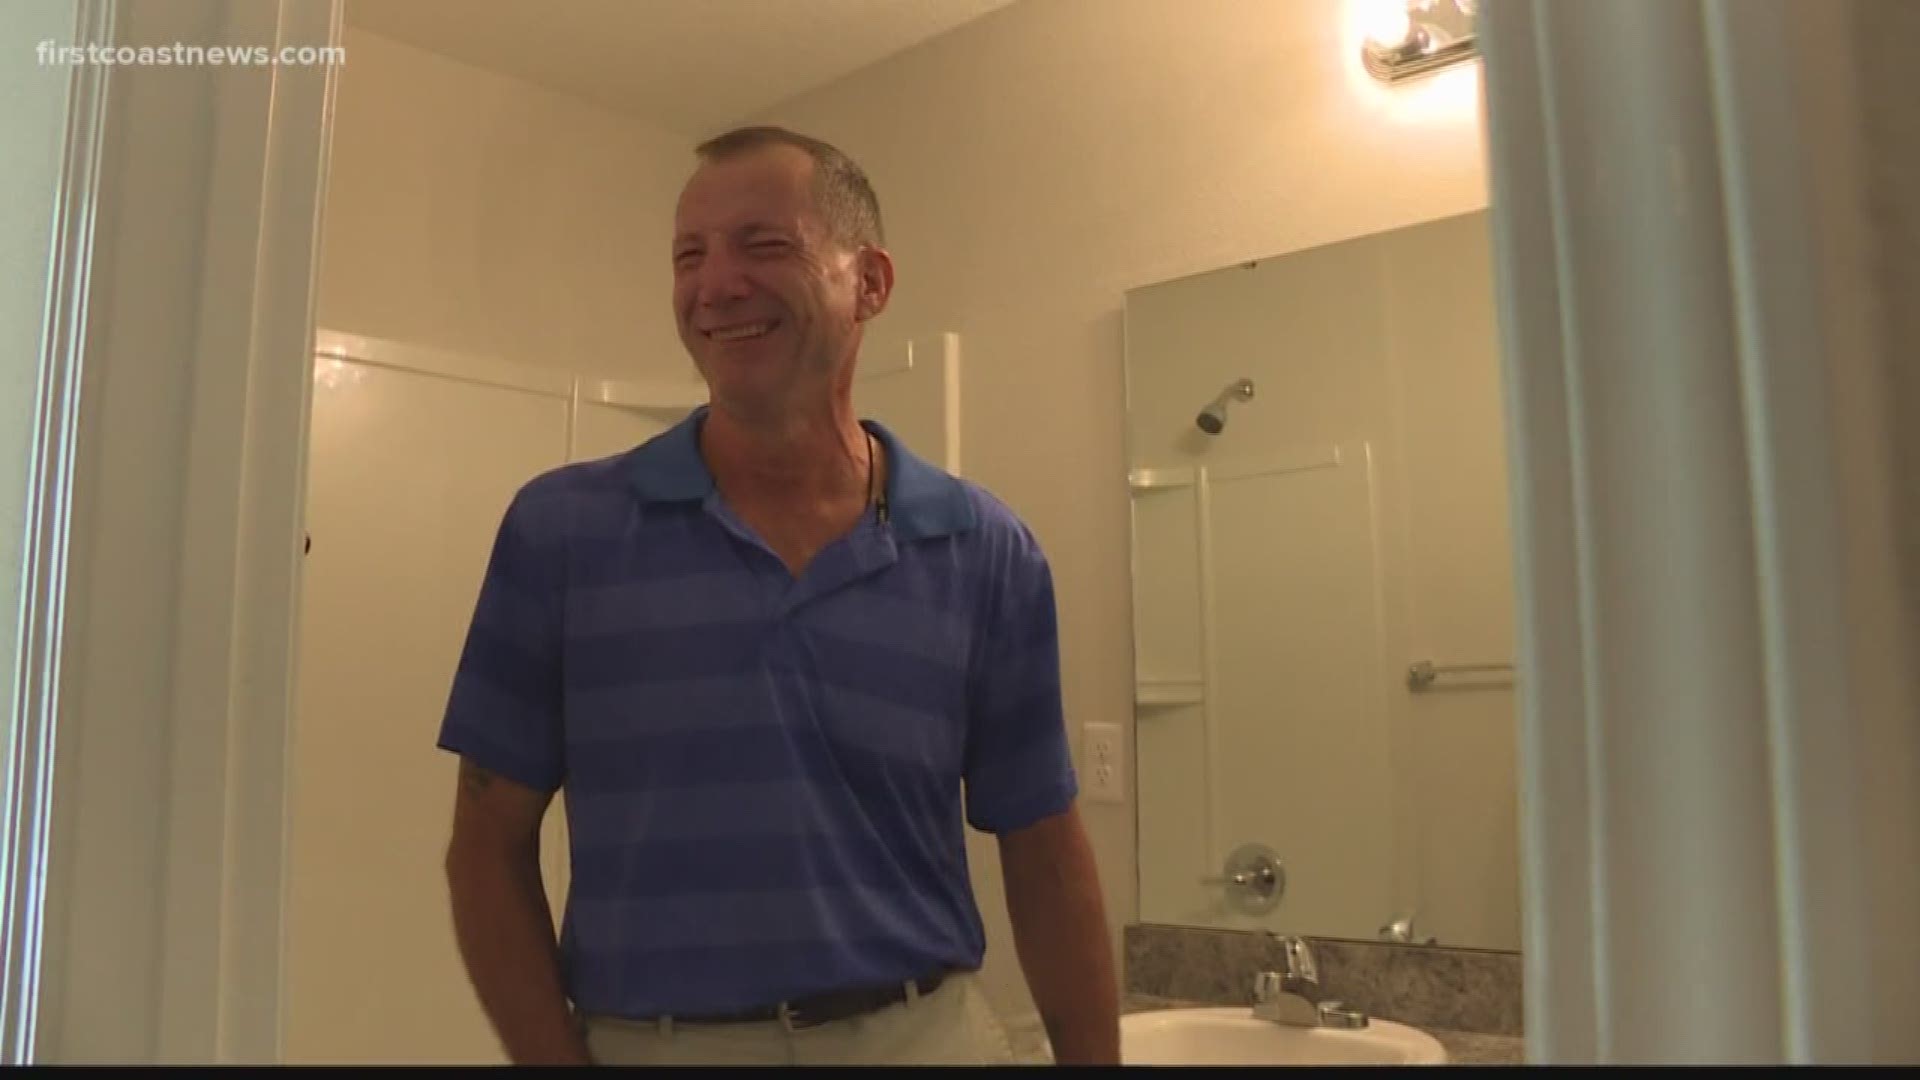 First Coast News cameras were rolling as Army veteran Rick Smith got his first glimpse at his new home.